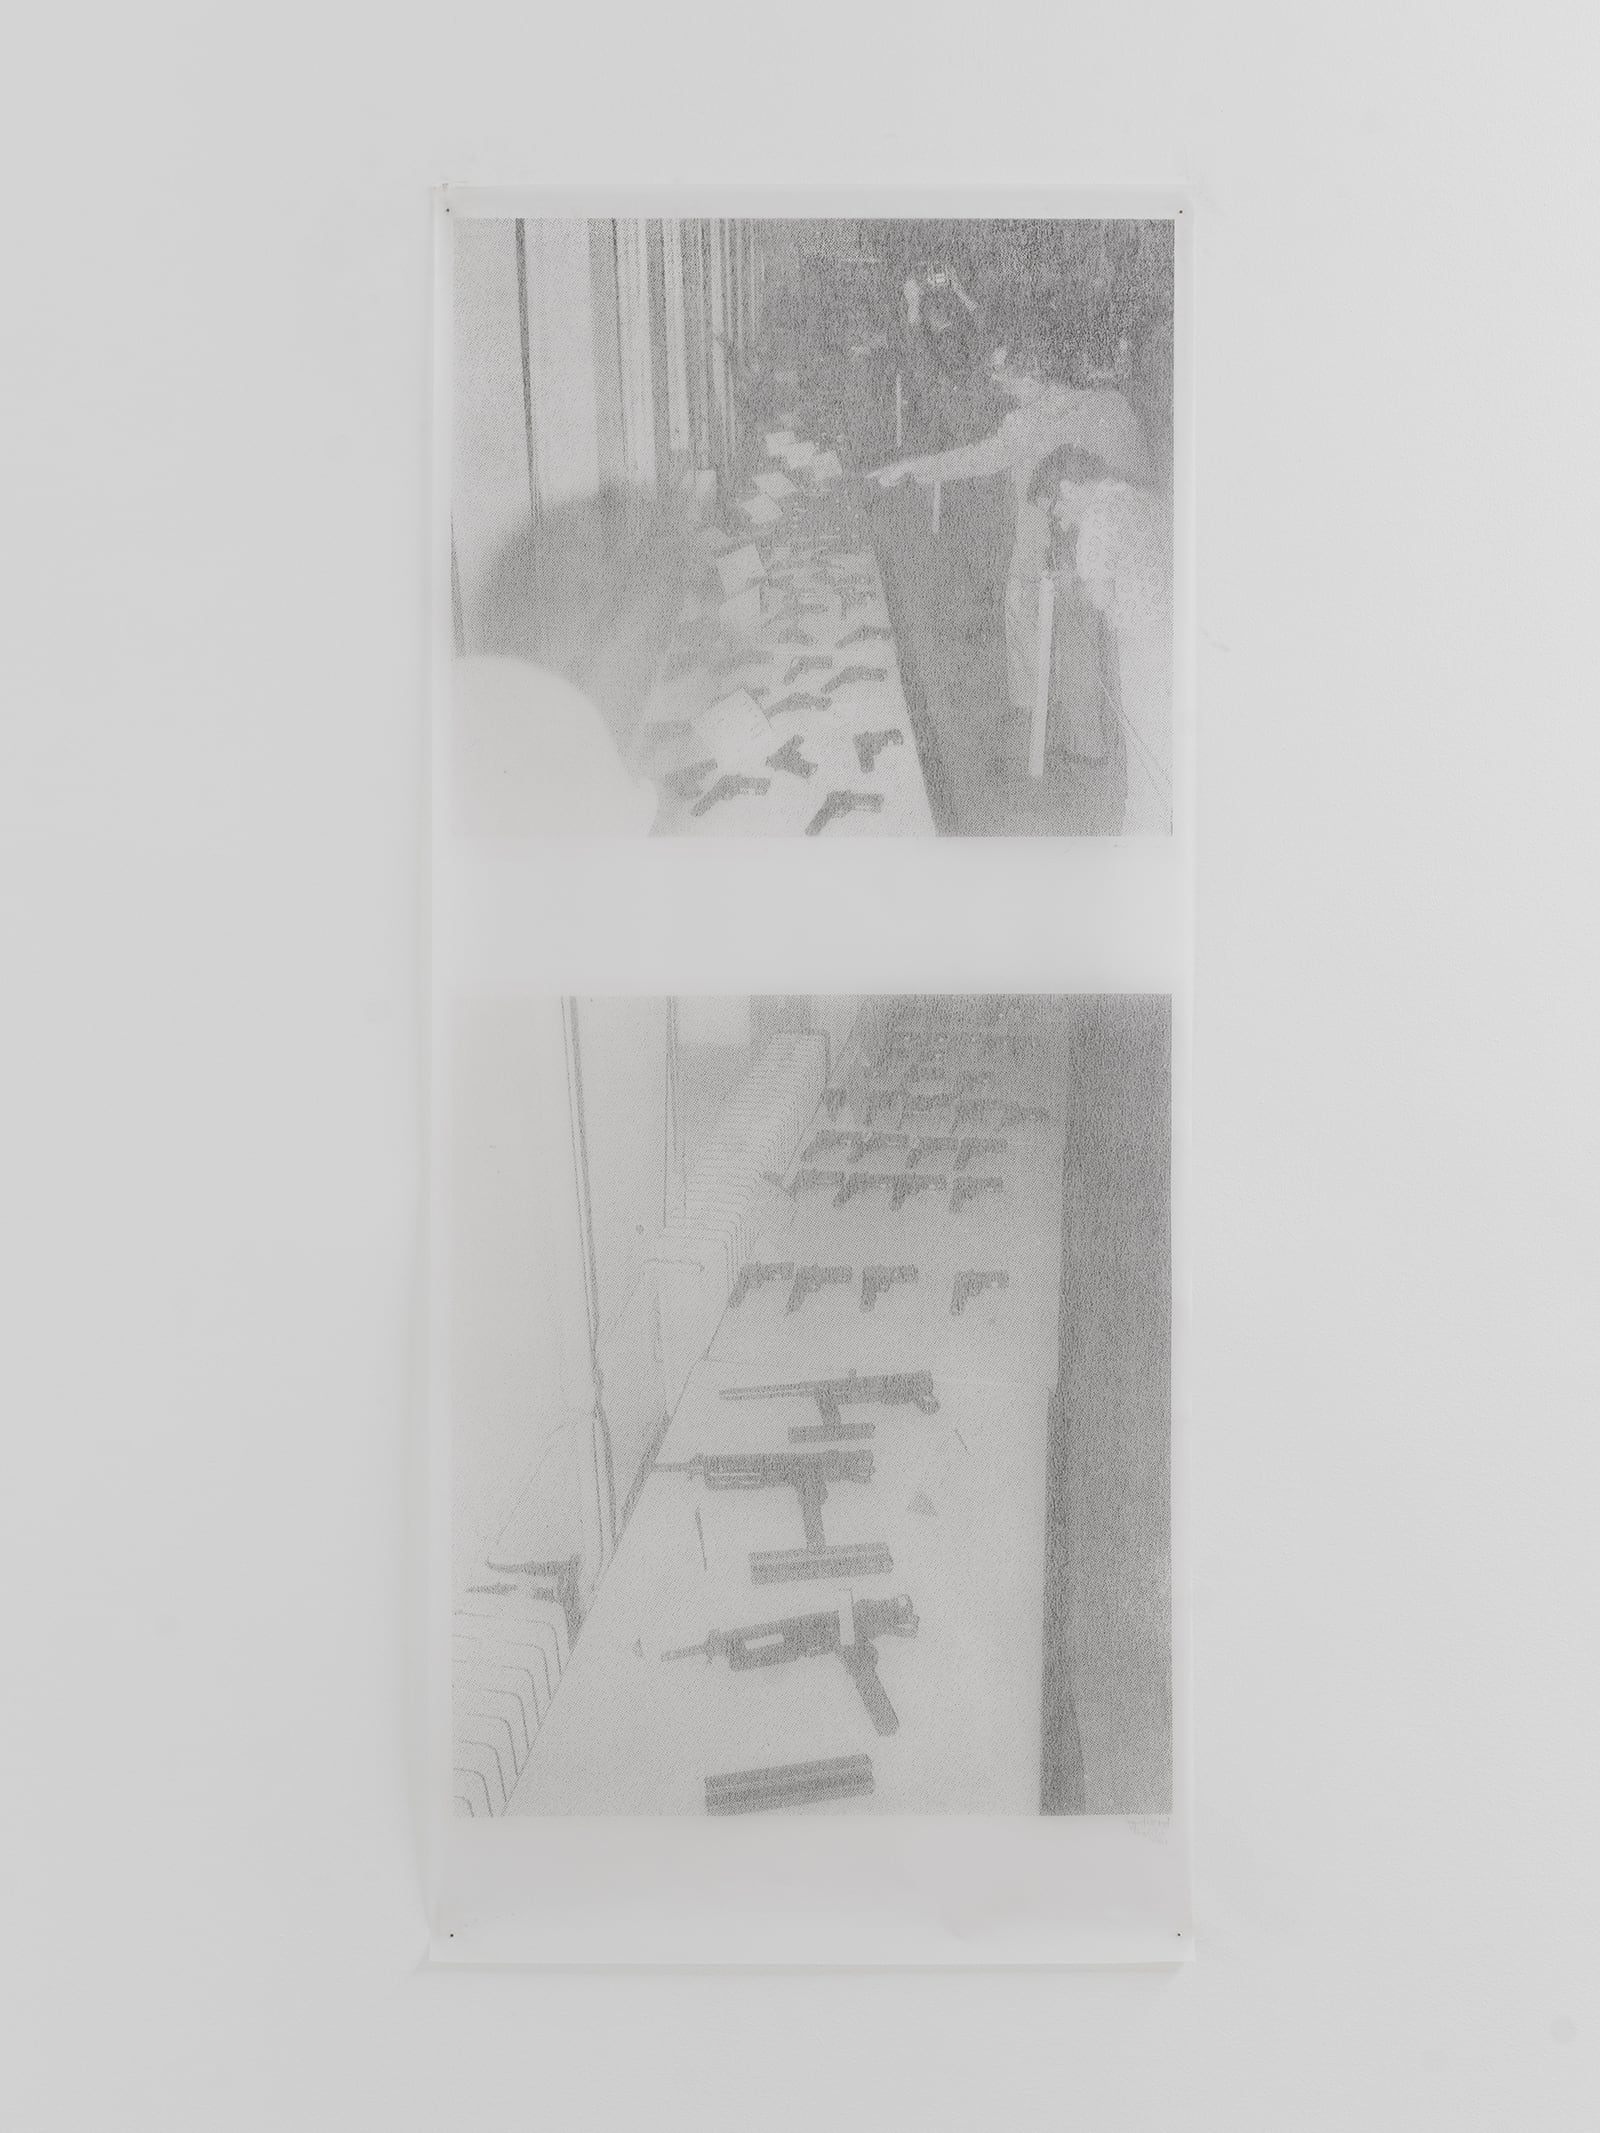 Andrei Beliaev, Exhibition view (display of firearms seized by security forces from anarchist groups during 1971-1973 martial law in Turkey), 2023, Reprint on tracing paper, 55 × 125 cm